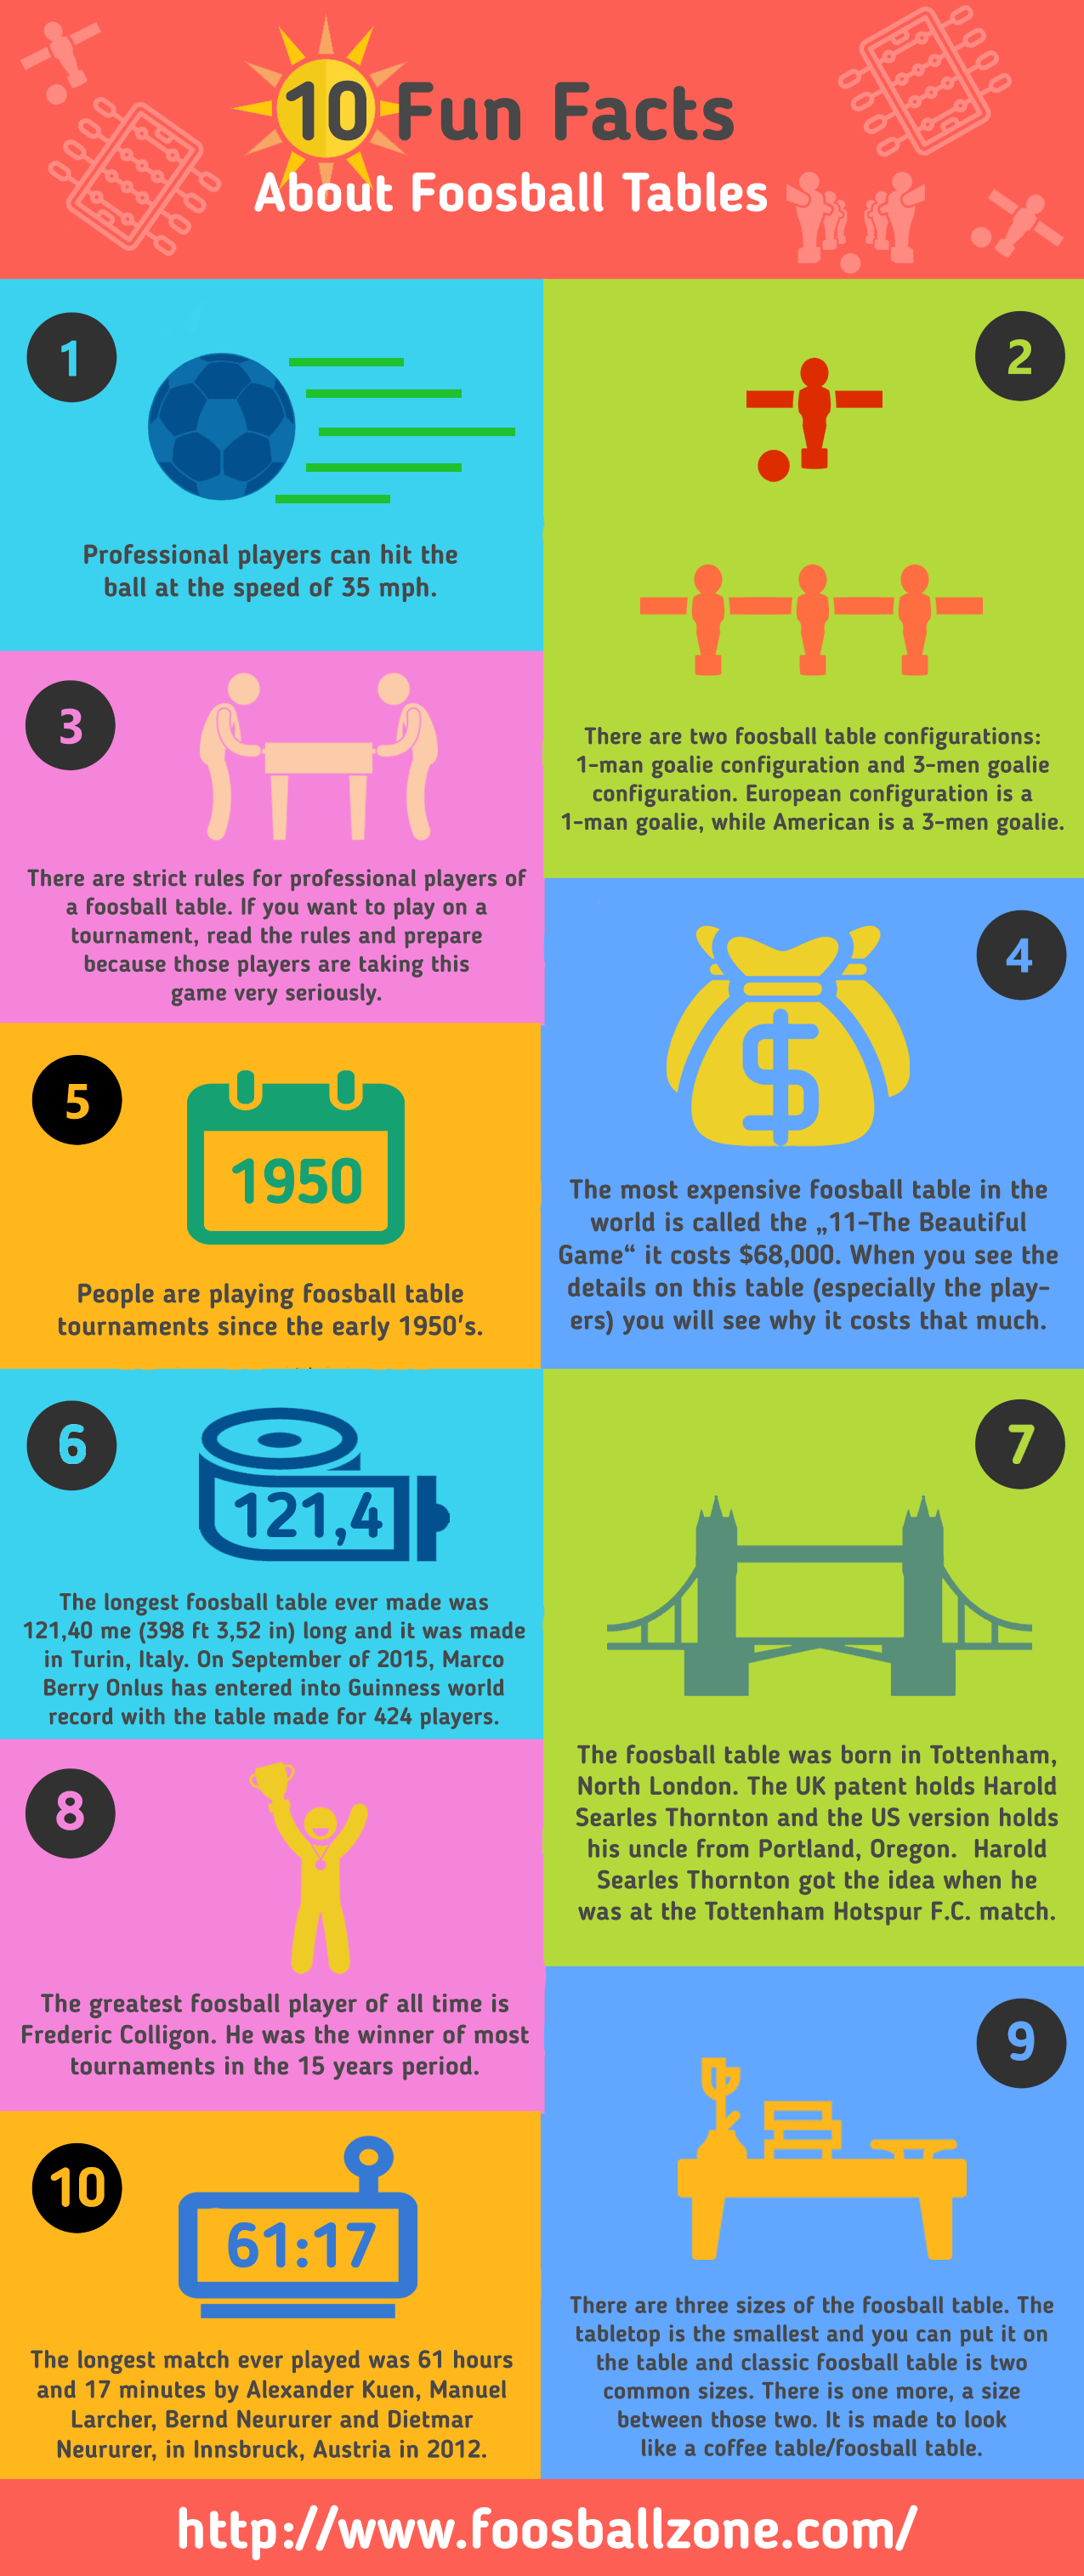 Fun And Interesting Facts About Foosball Tables Infographic